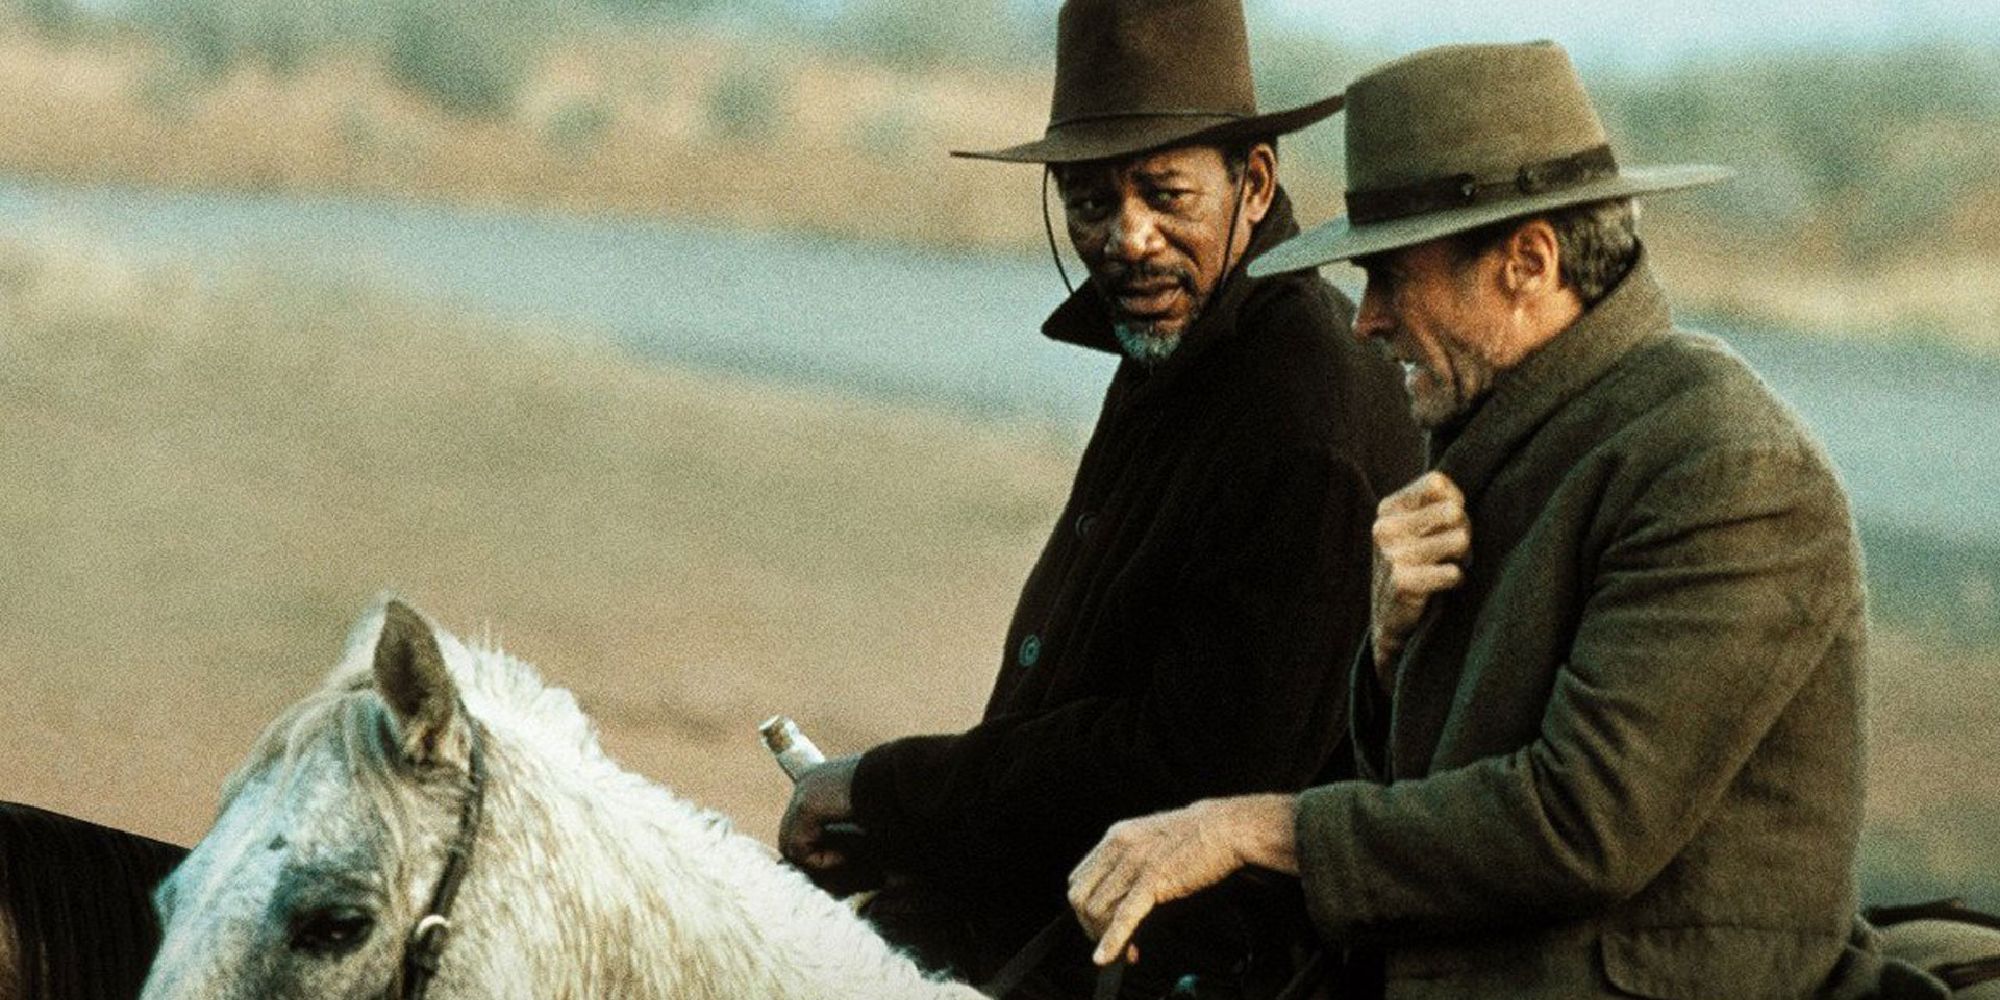 Morgan Freeman as Ned Logan and Clint Eastwood as William Munny riding horses in Unforgiven